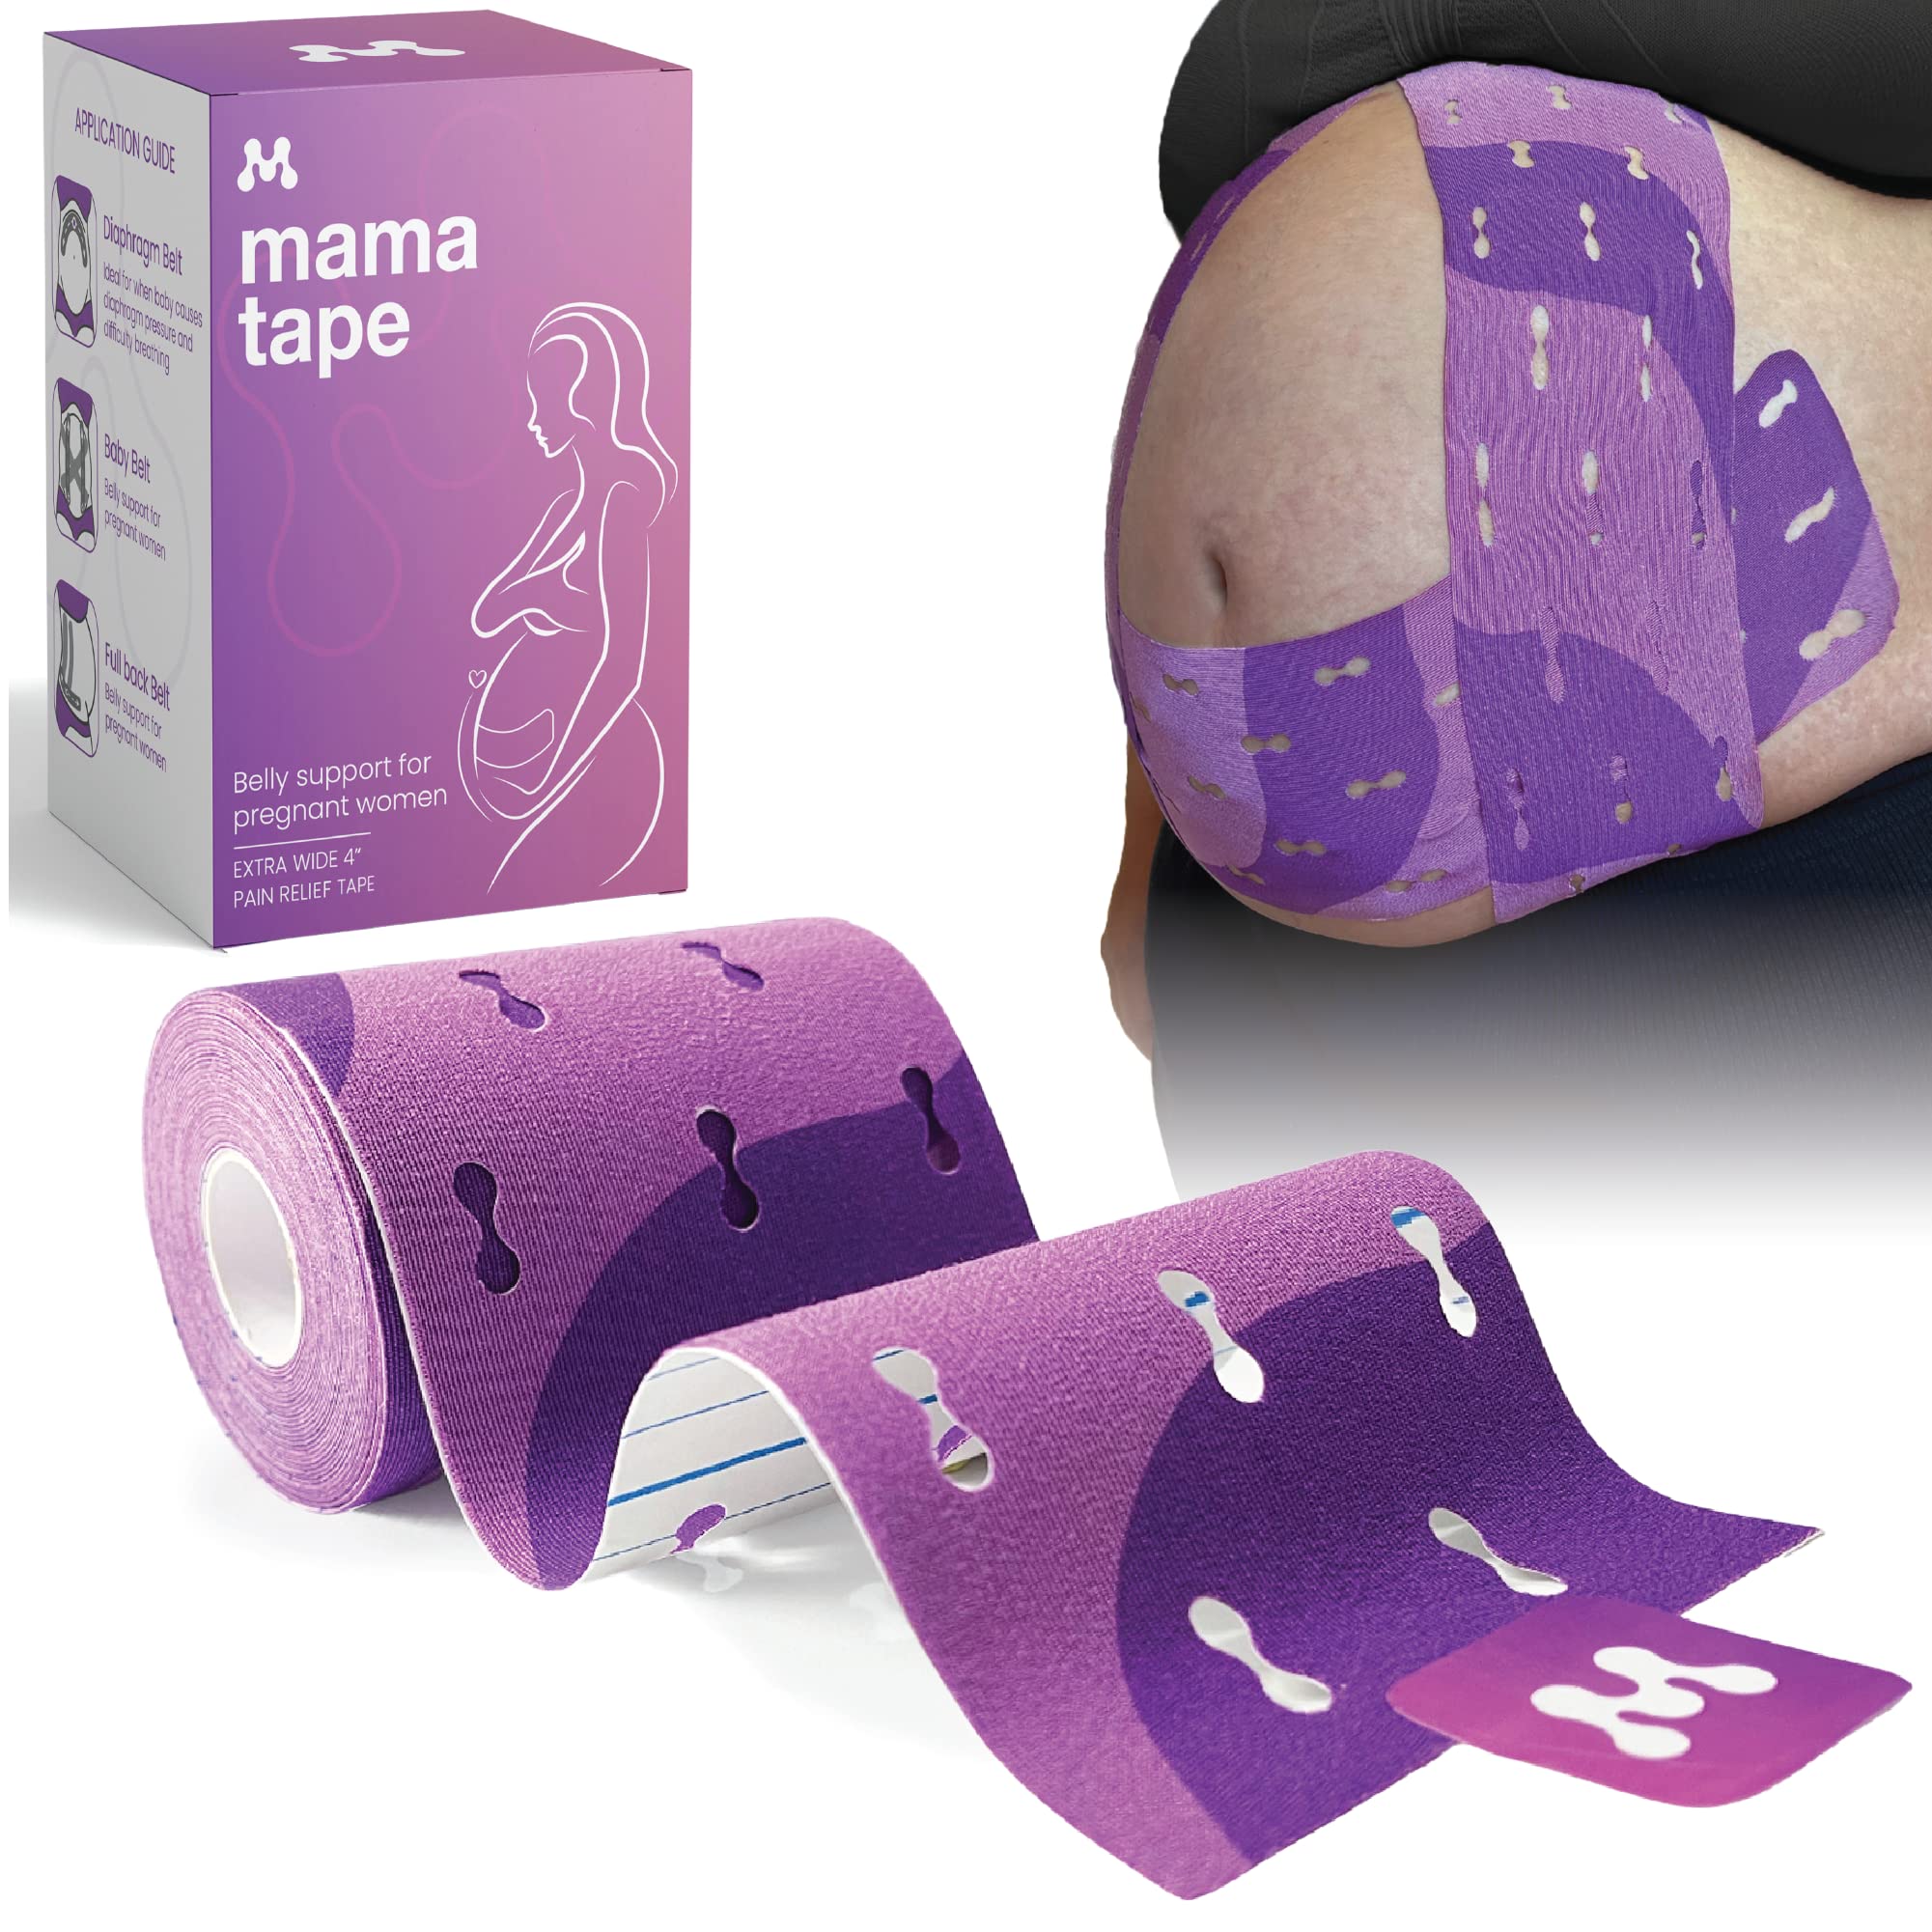  Customer reviews: Pregnancy Spider Tape, Full Belly Support, Relieves Stomach Tension, Kinesiology Tape, Drug and Latex Free, Reduce  Pain & Correct Posture